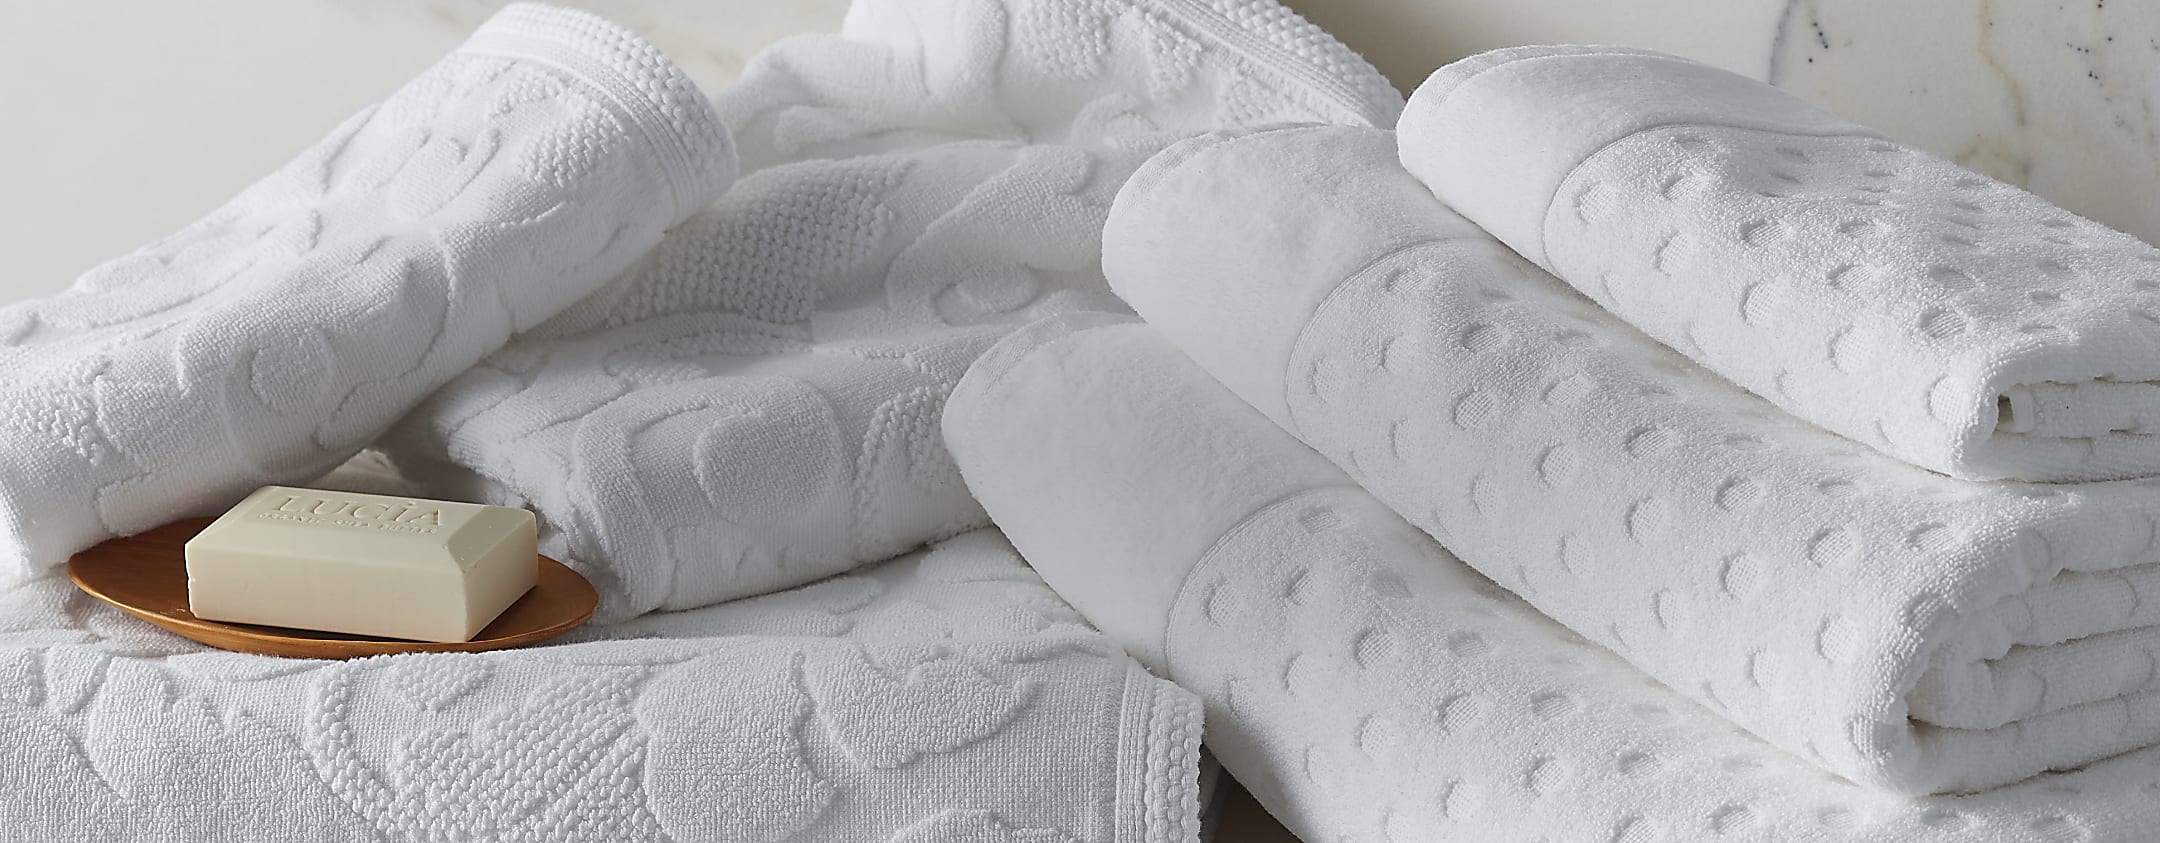 stack of soft white towels